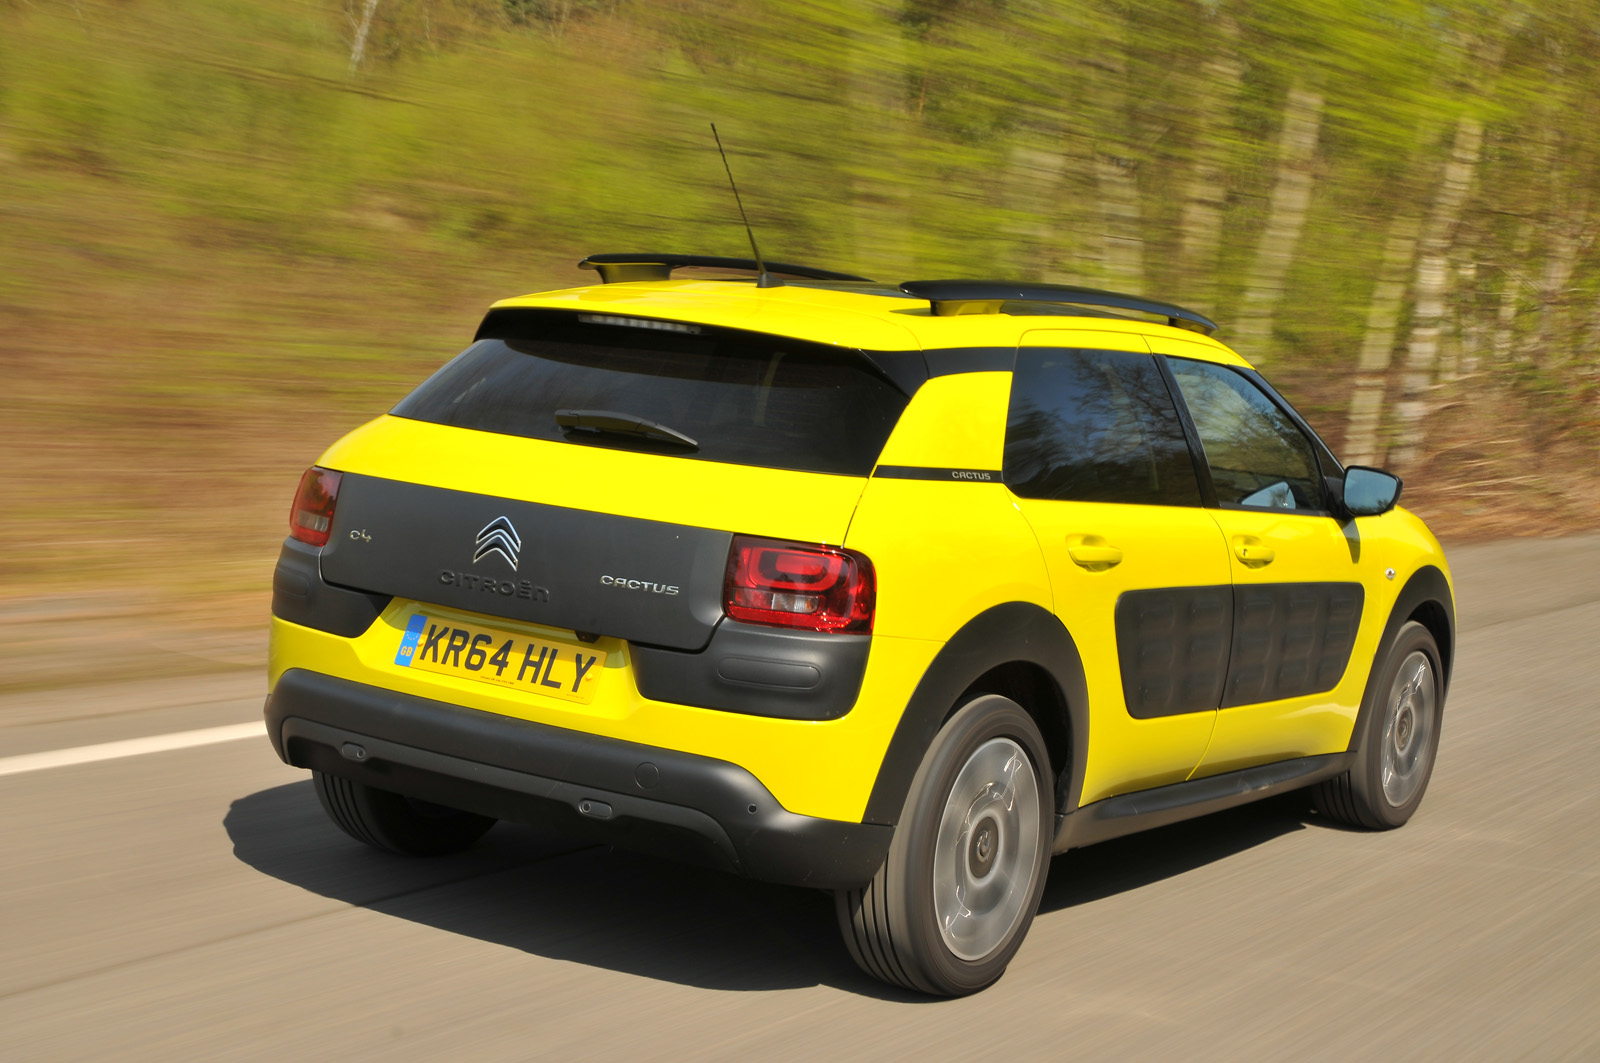 Nearly new buying guide: Citroen C4 Cactus